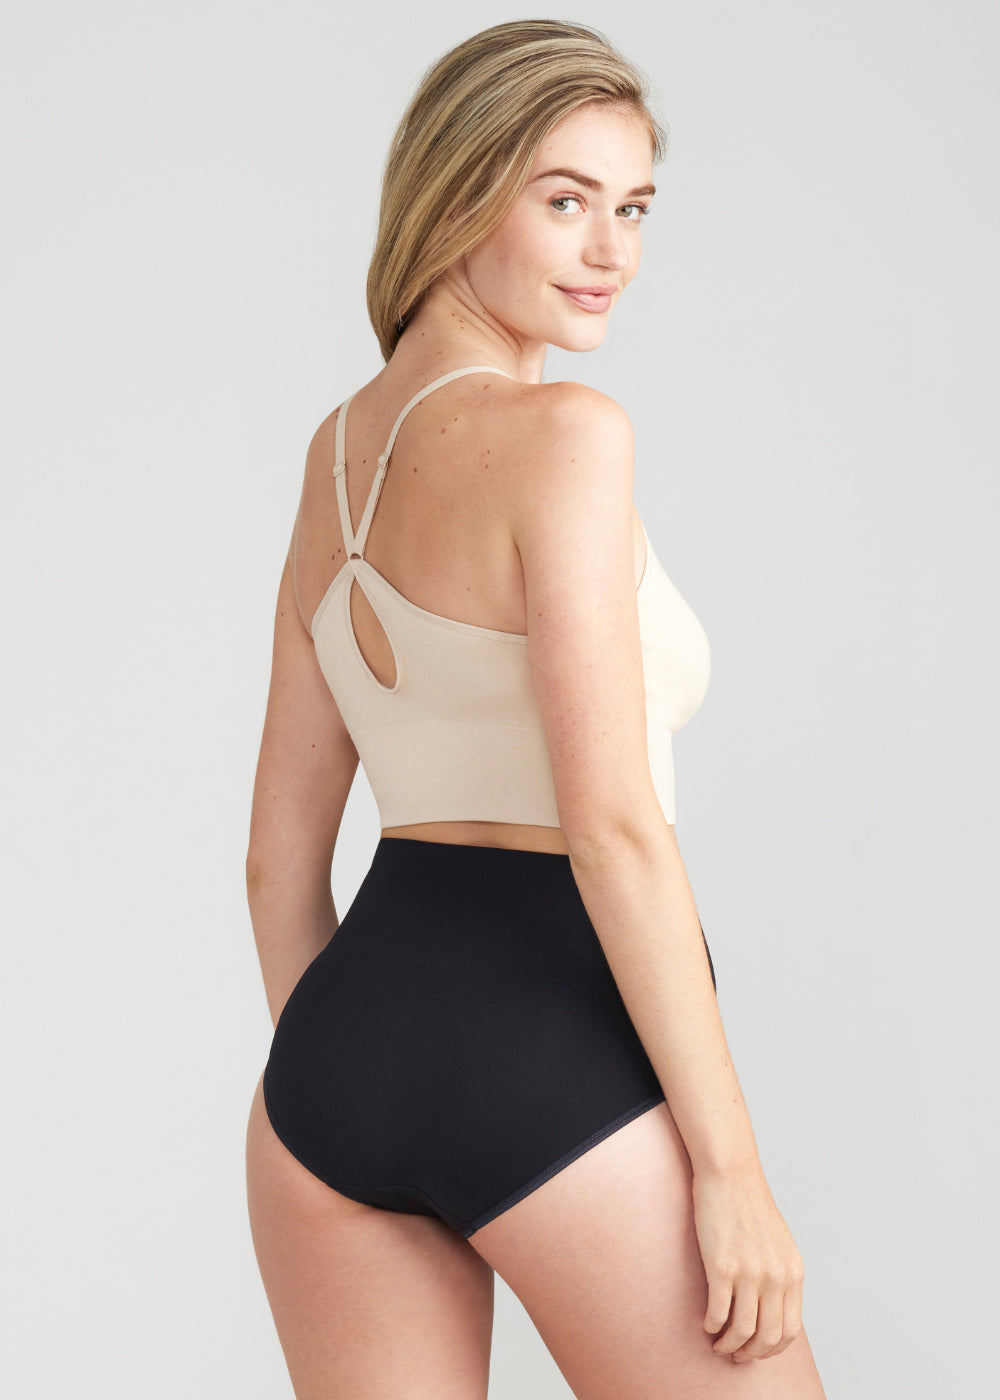 Yummie Ultralight Seamless Smoothing Brief, Frappe, Size S/M, from Soma